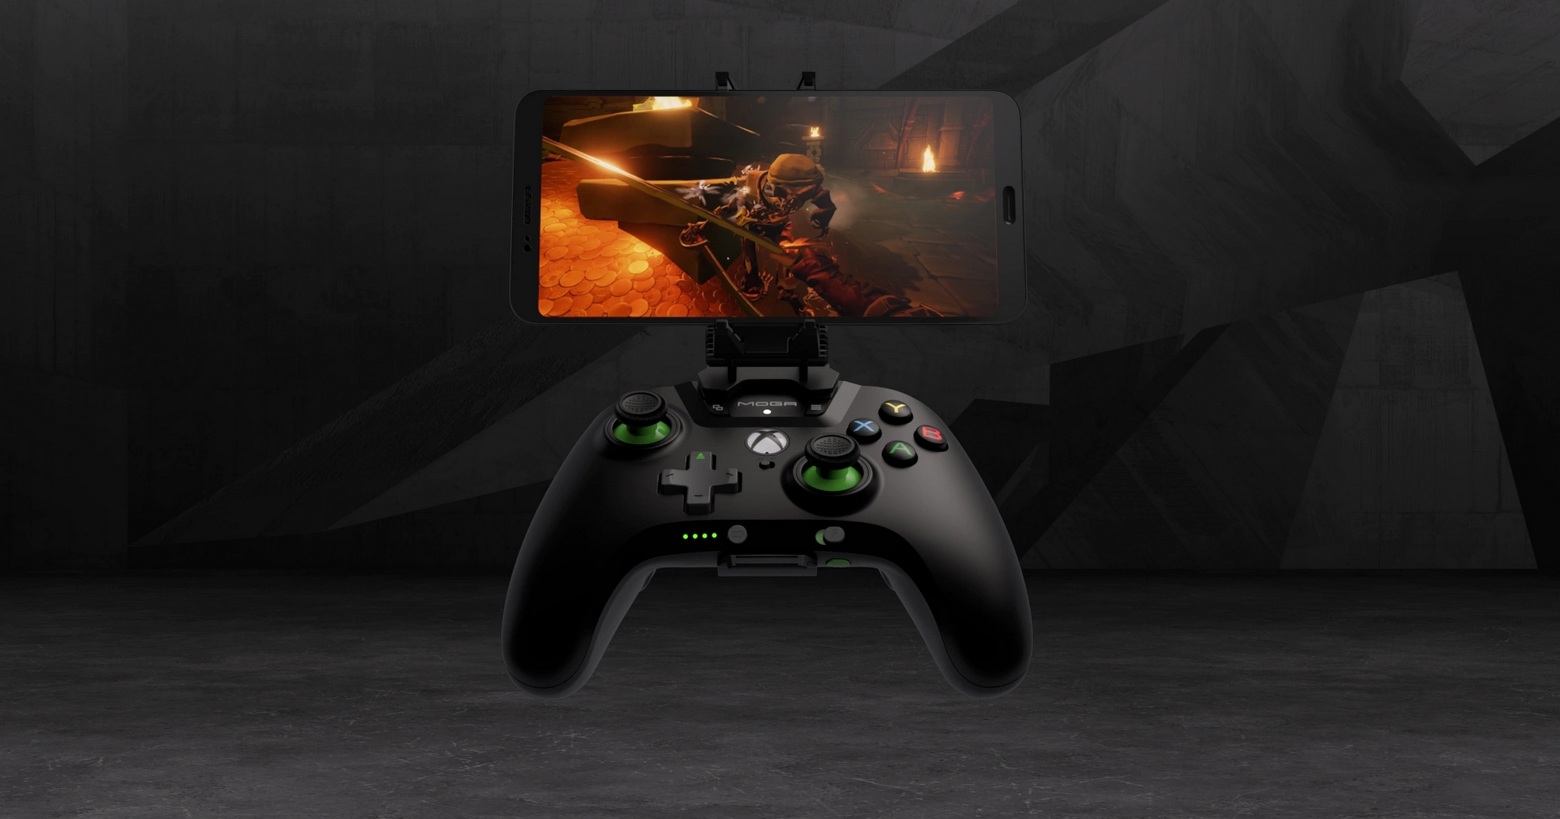 Here we see a controller from Xbox with a smartphone mounted in front of a dark background. In this way, the controller can be connected to the cell phone via Bluetooth and numerous games can be played via Microsoft's streaming service. An action FPS title can be seen on the cell phone. The background consists of a dark gray concrete-like space with angled lines and shapes. The controller has a black color and a curved ergonomic shape with the typical Xbox logo in white in the center. The two joysticks have a green base and on the right side of the controller we see the typical colorful buttons "X, Y, A, B". The game seen on the phone is a screenshot from a medieval first-person action adventure and the player is currently in a sword duel with a knight in a fiery place.